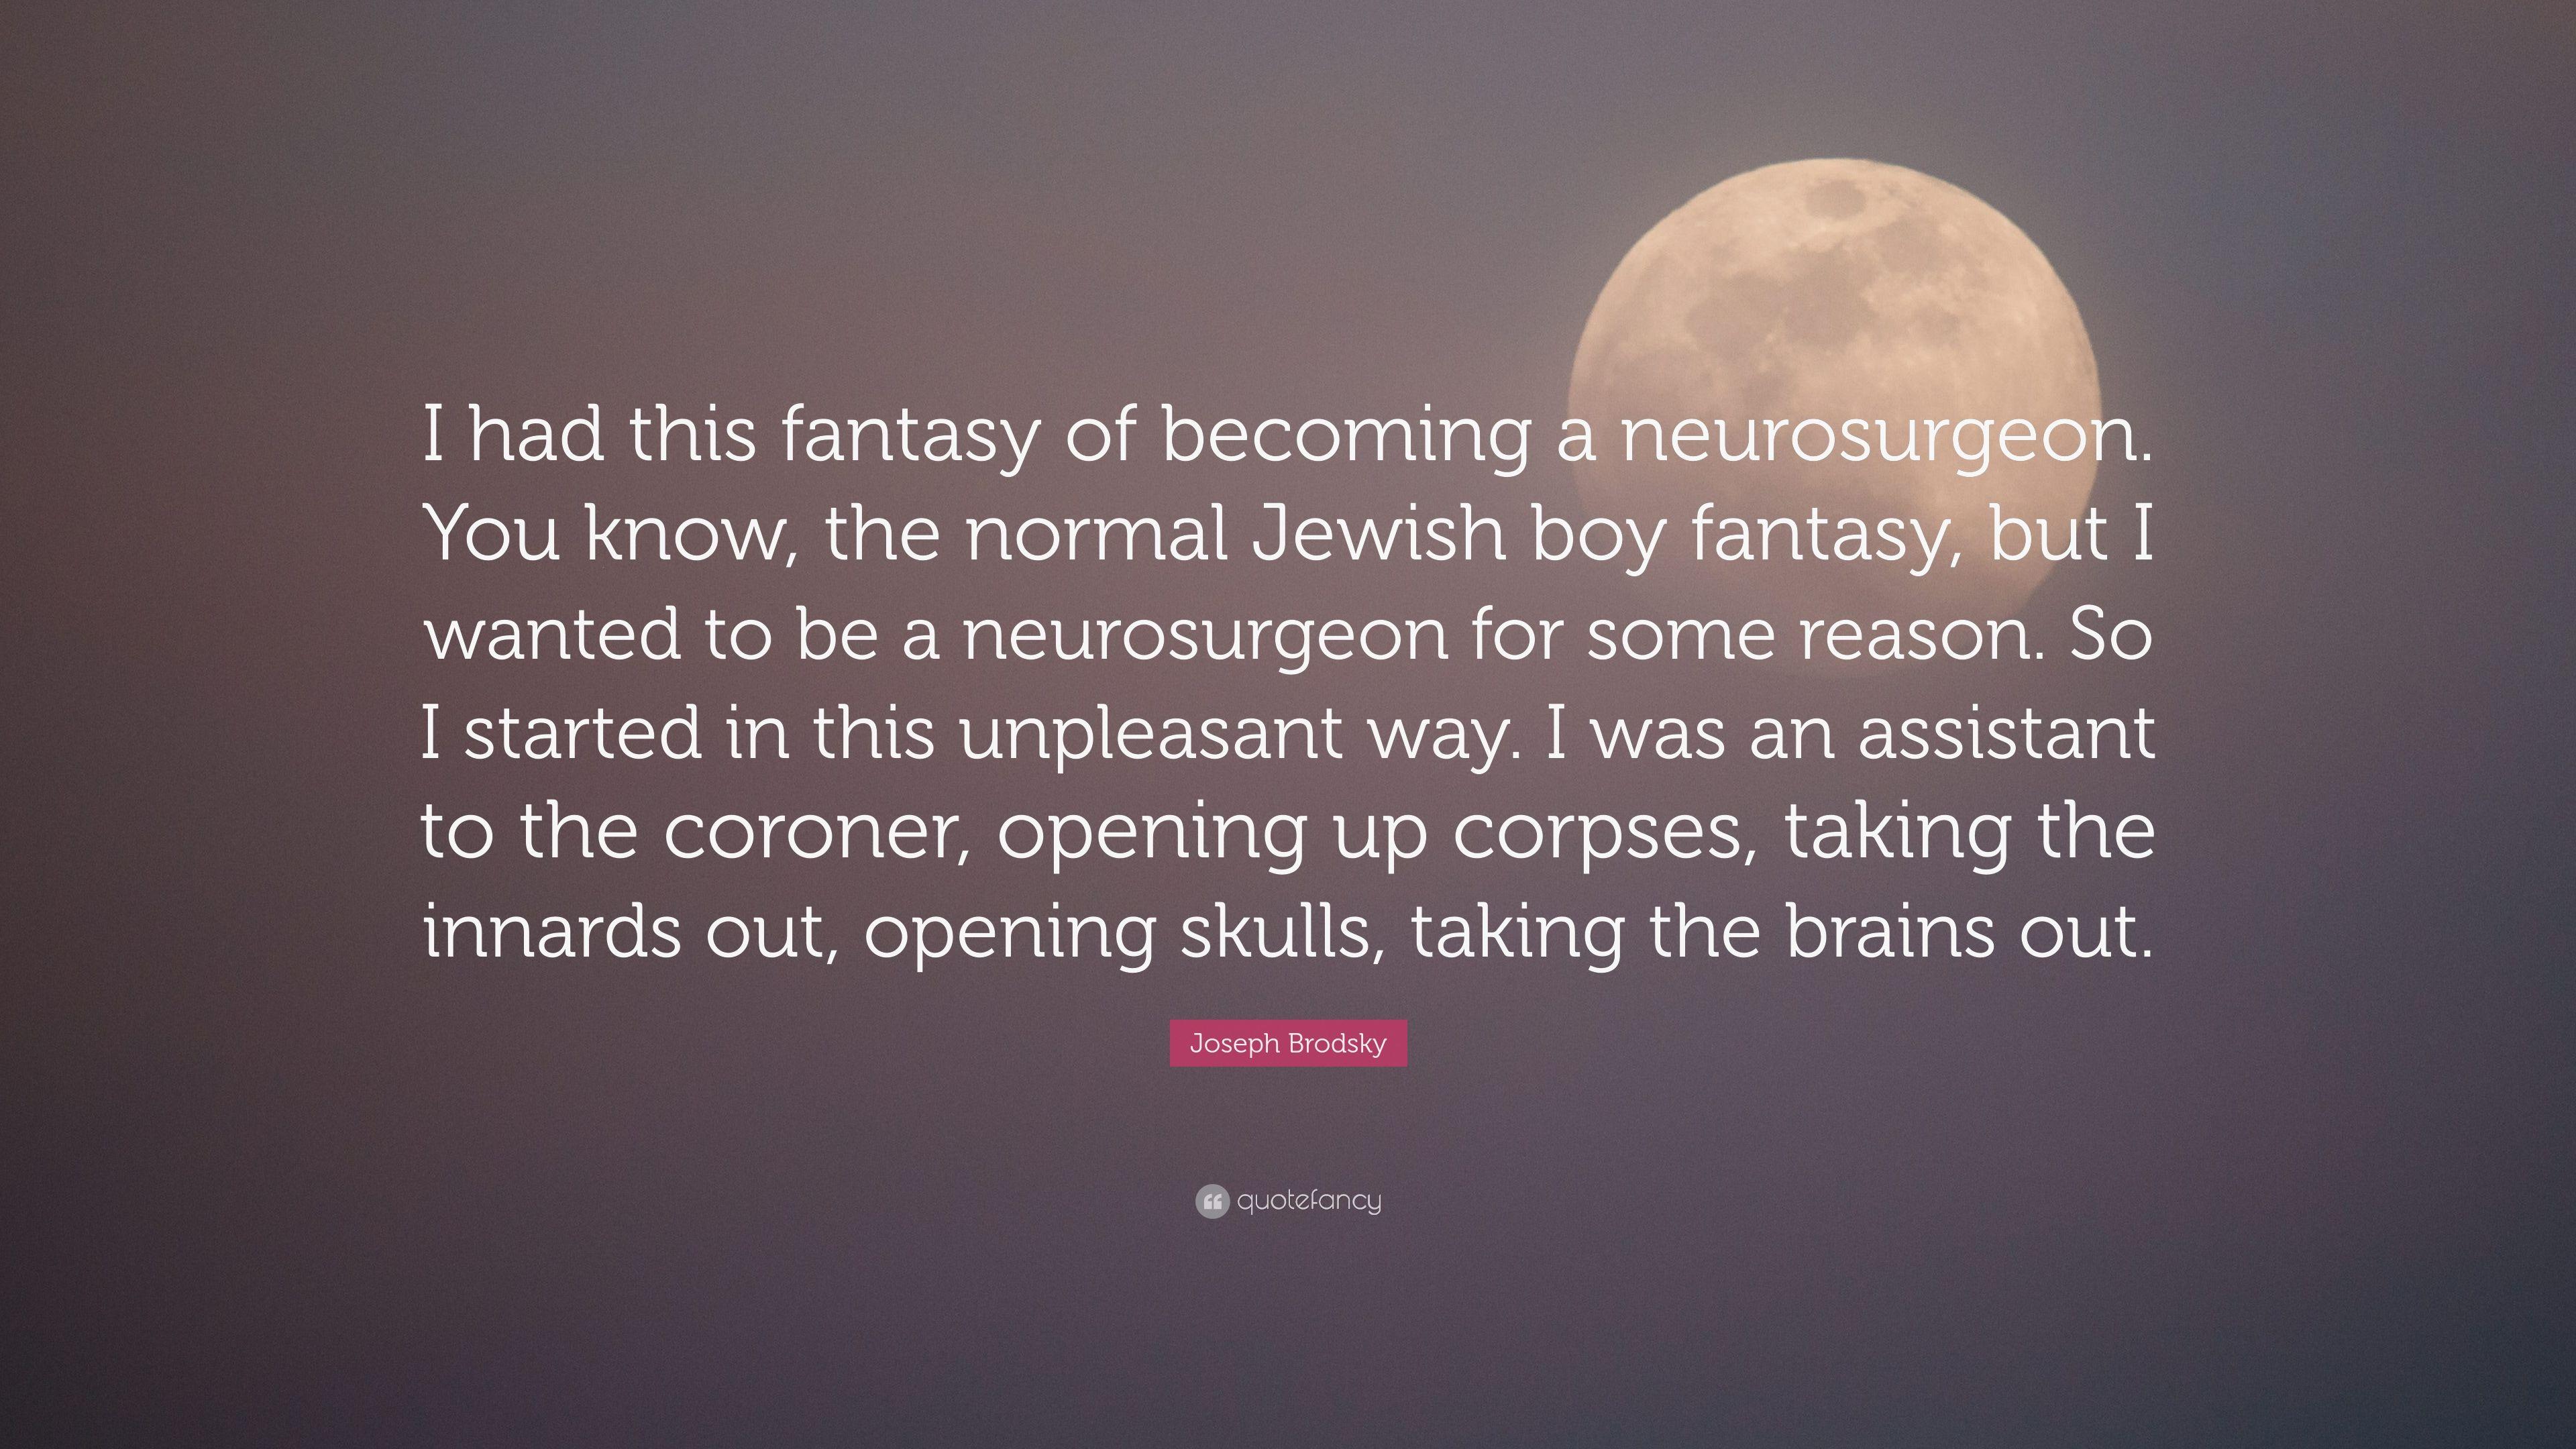 Joseph Brodsky Quote: “I had this fantasy of becoming a neurosurgeon